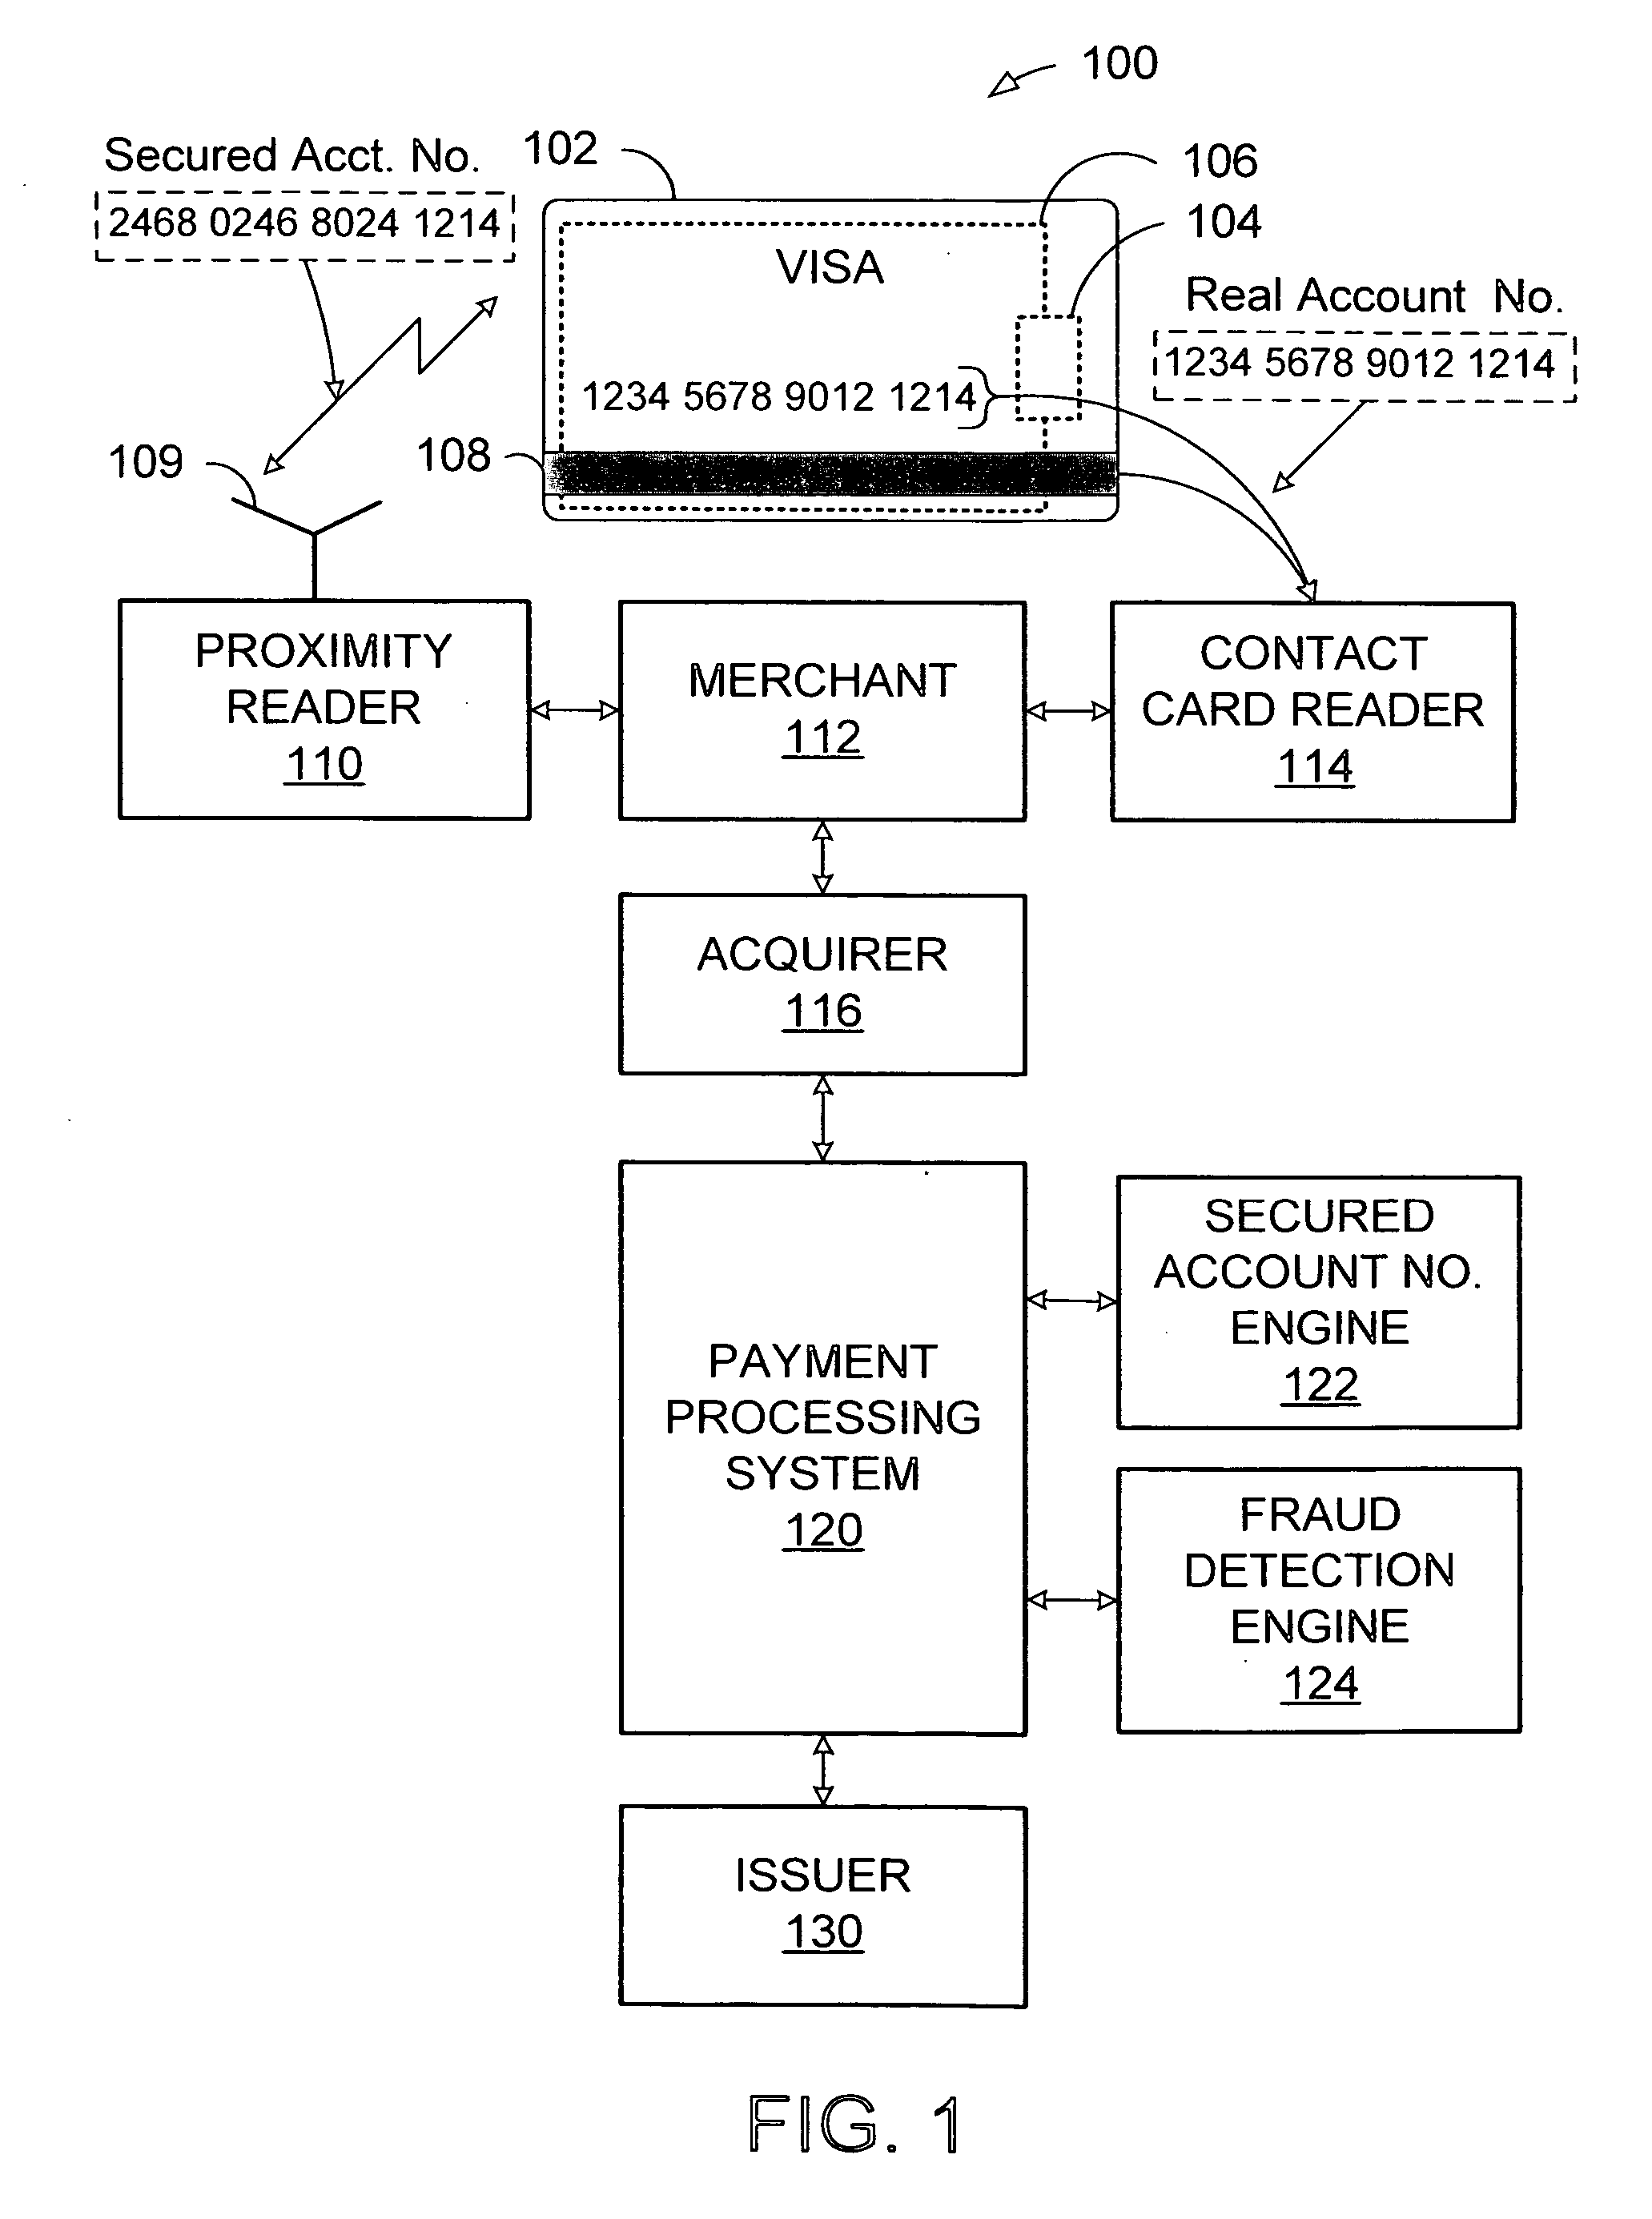 System and method for secured account numbers in proximity devices